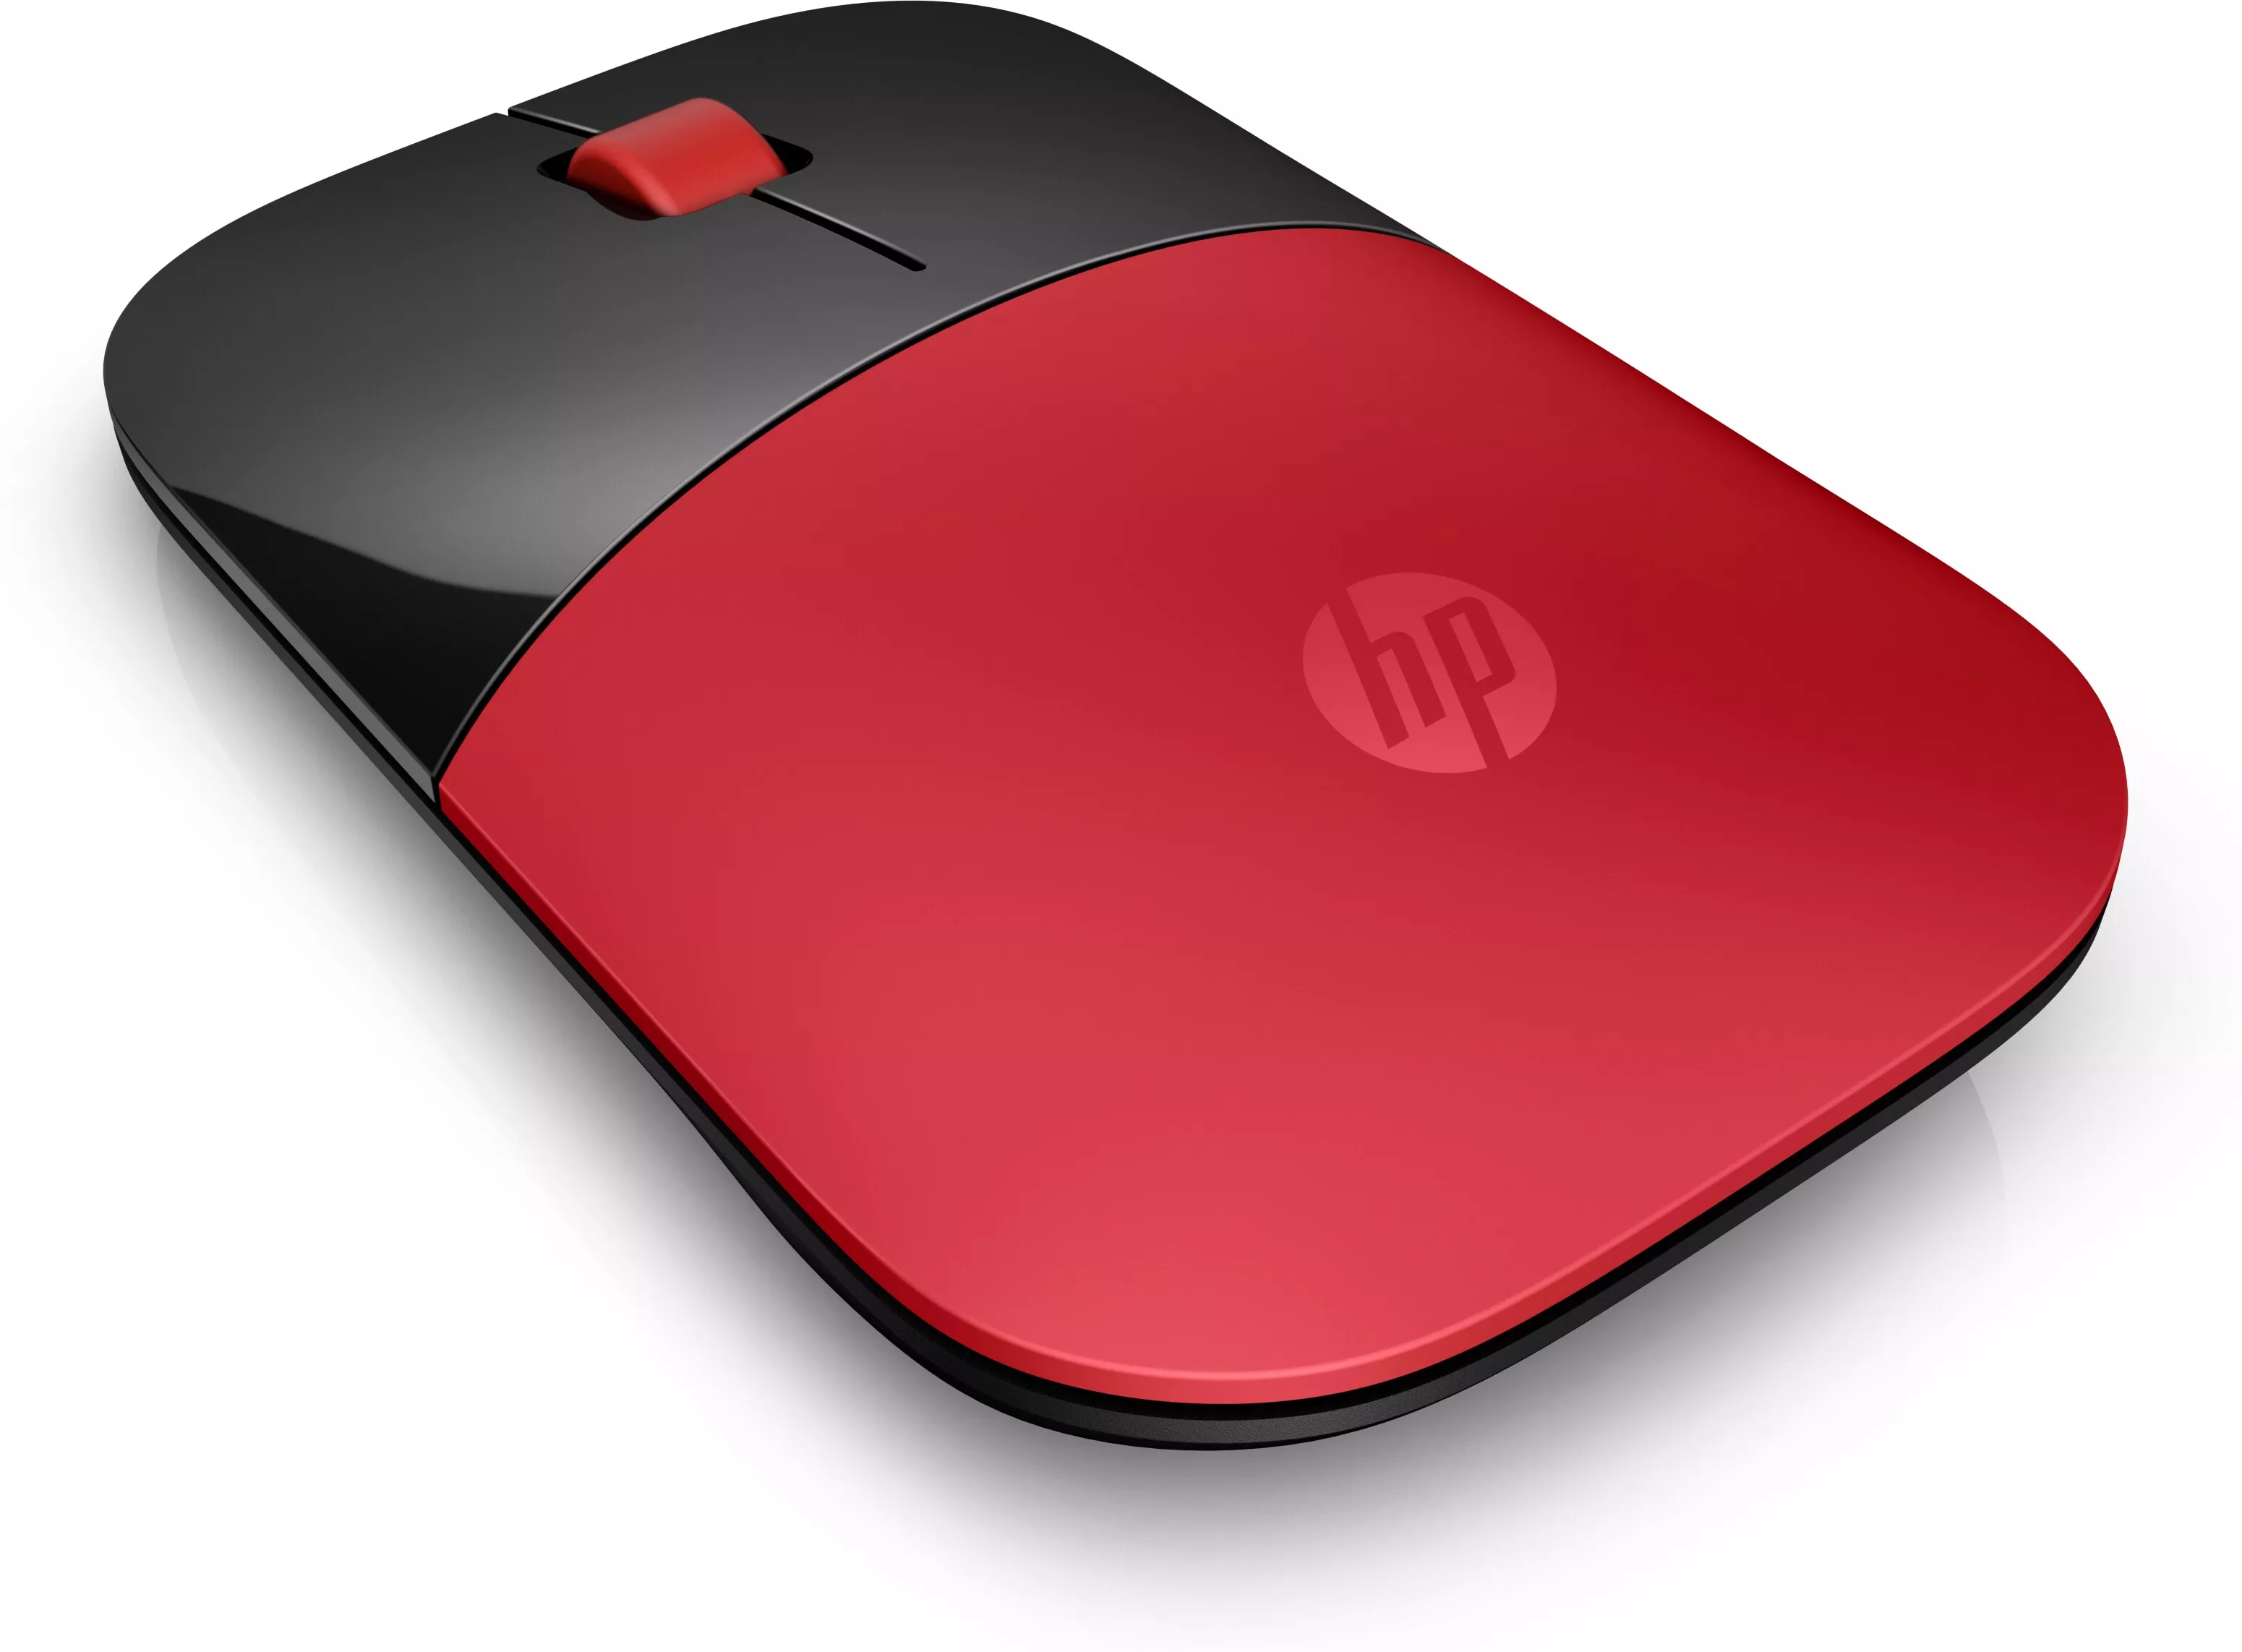 Achat HP Z3700 Wireless Mouse Cardinal Red sur hello RSE - visuel 9